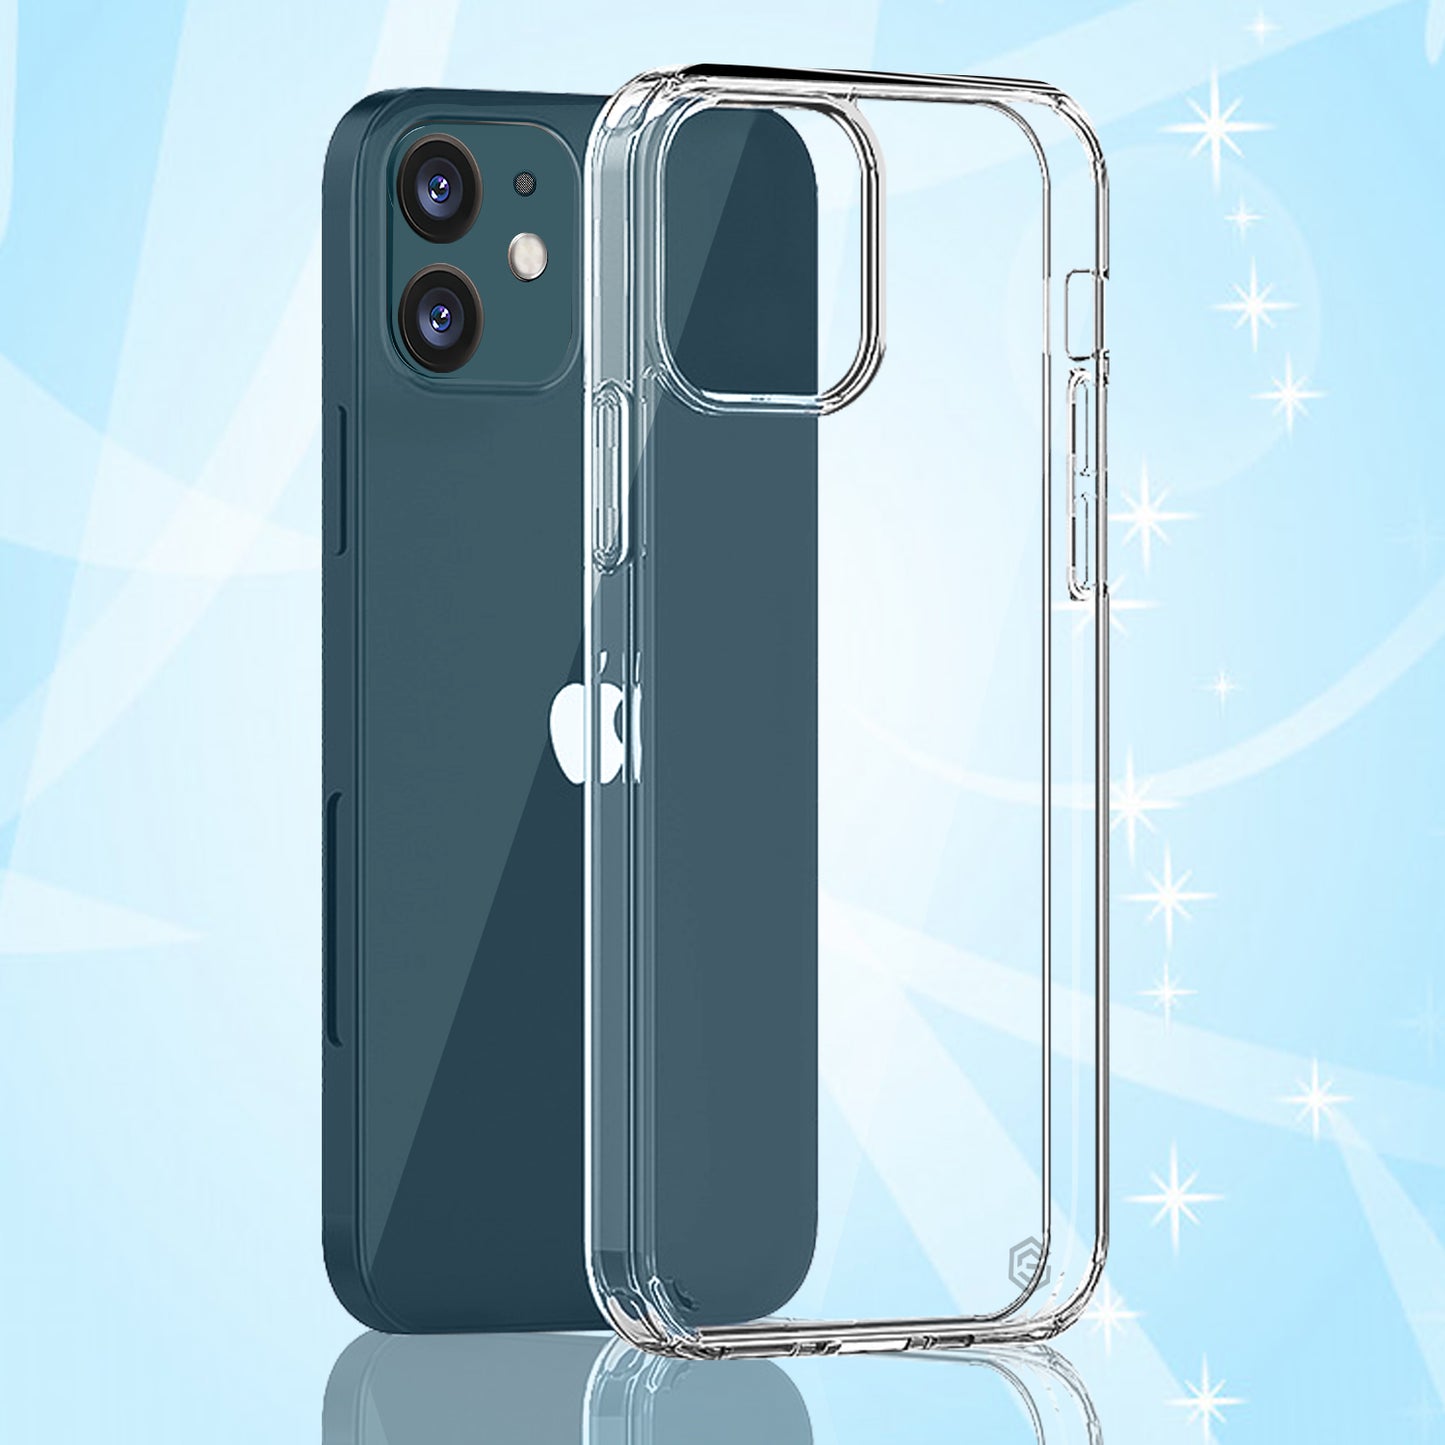 GRIPP Clear Case for iPhone 12 mini - Clear